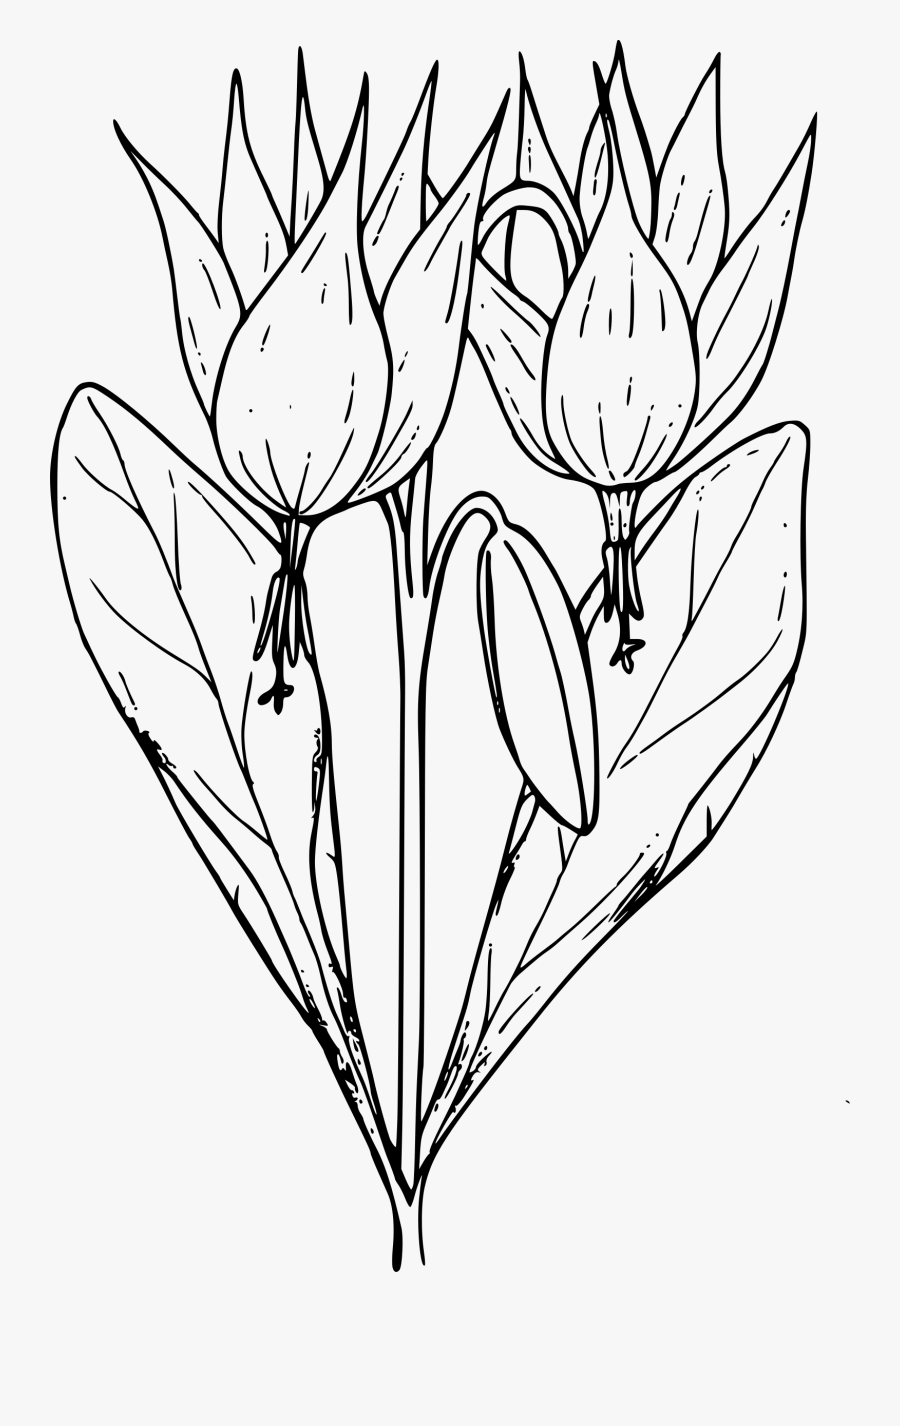 Trout Lily - Big Lily Flower Drawing, Transparent Clipart